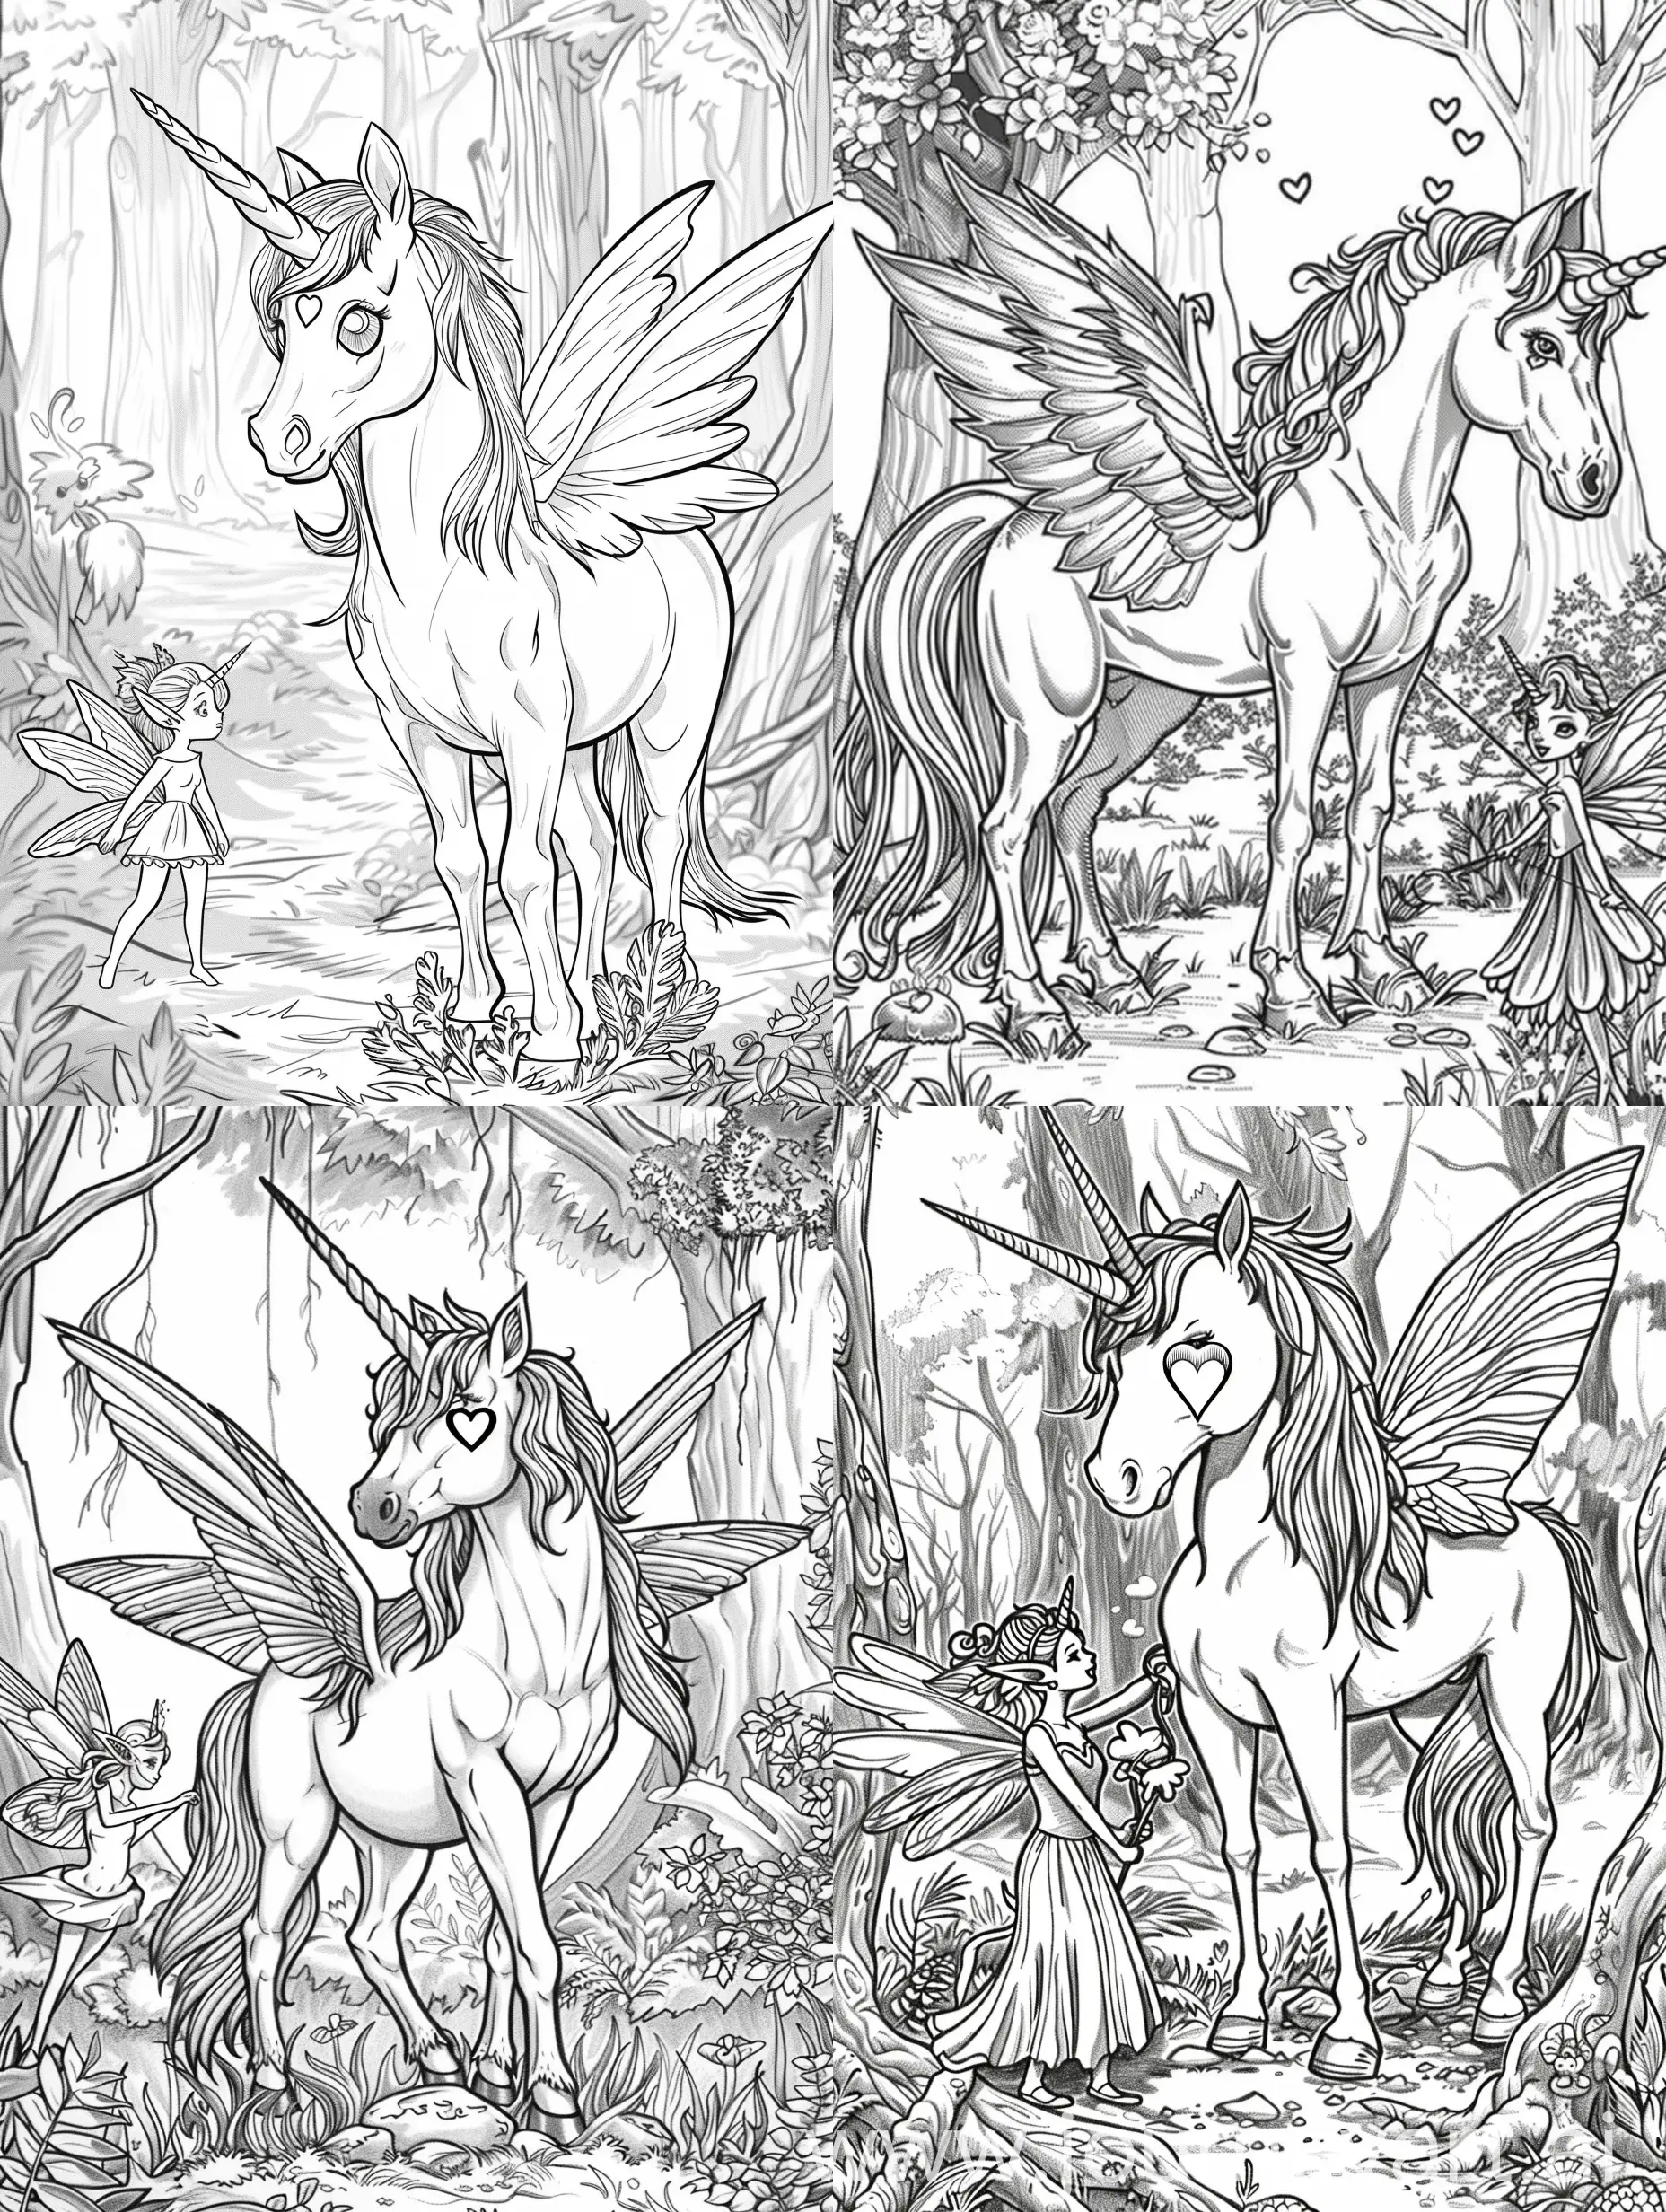 Realistic-Unicorn-Coloring-Book-Magical-Forest-Adventure-with-Fairy-Companion